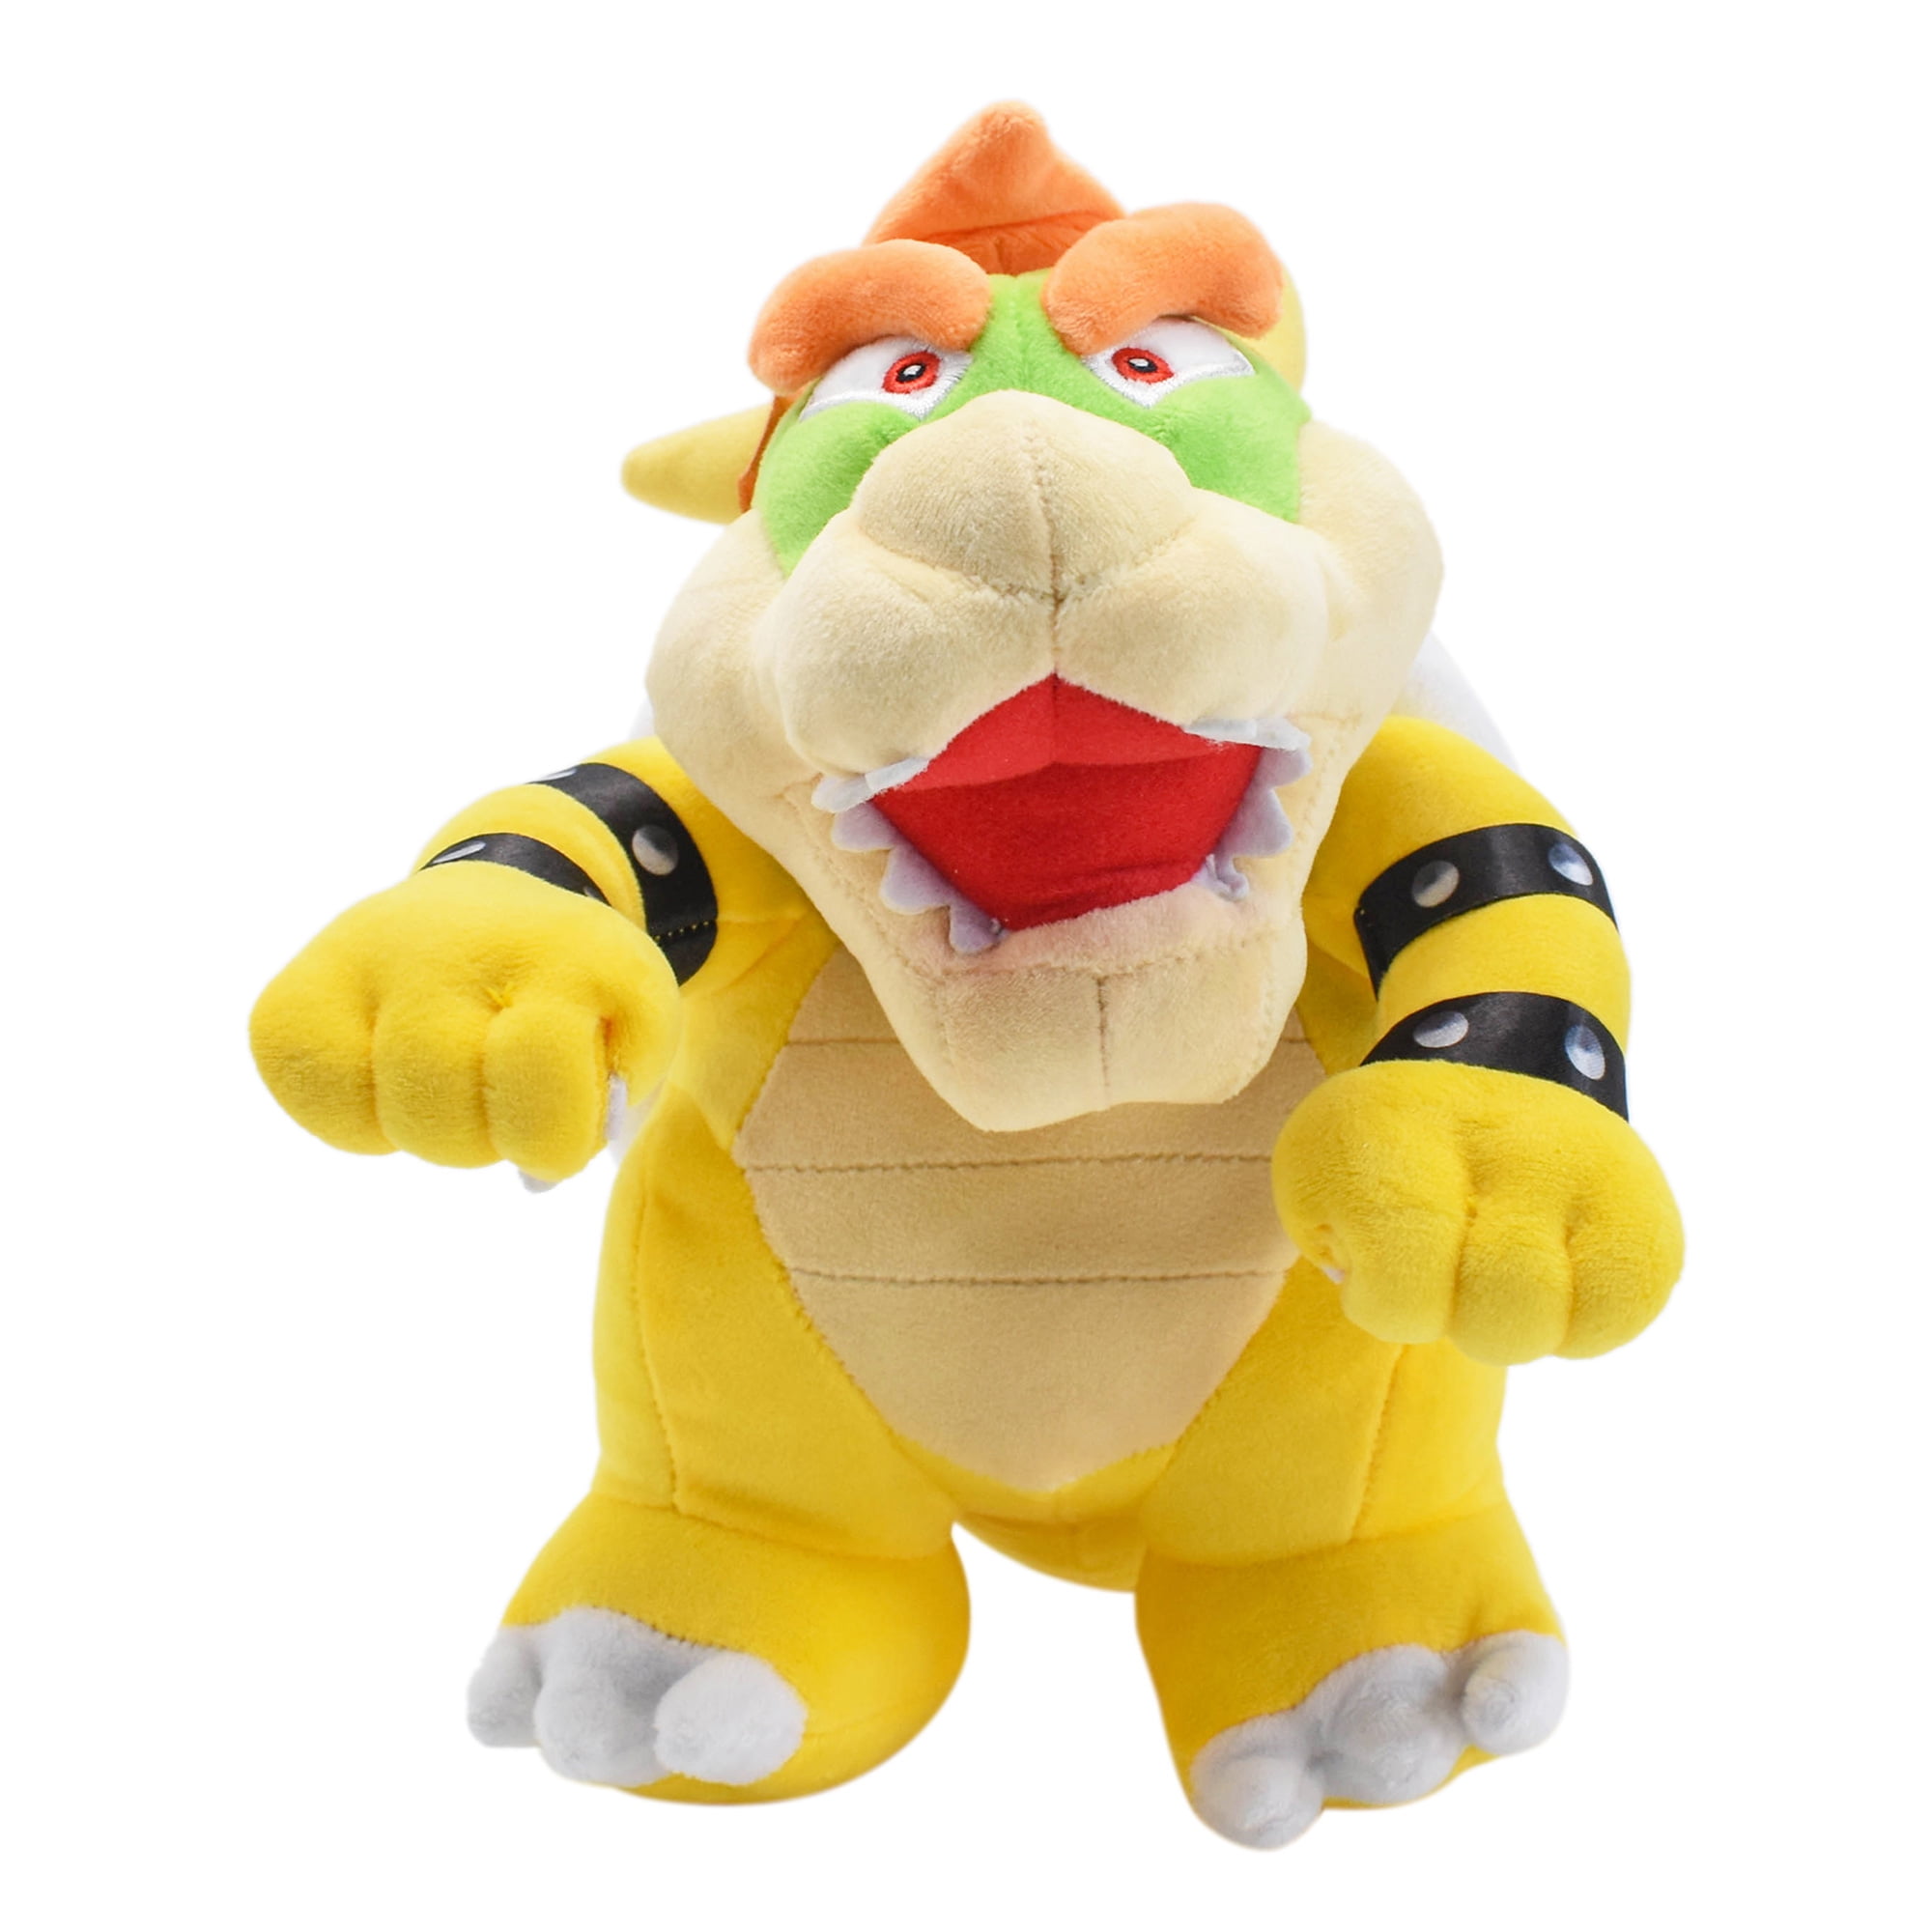 New Super Mario Bowser Soft Plush Anime Stuffed Toy Doll Gift Collect Decor 25cm 